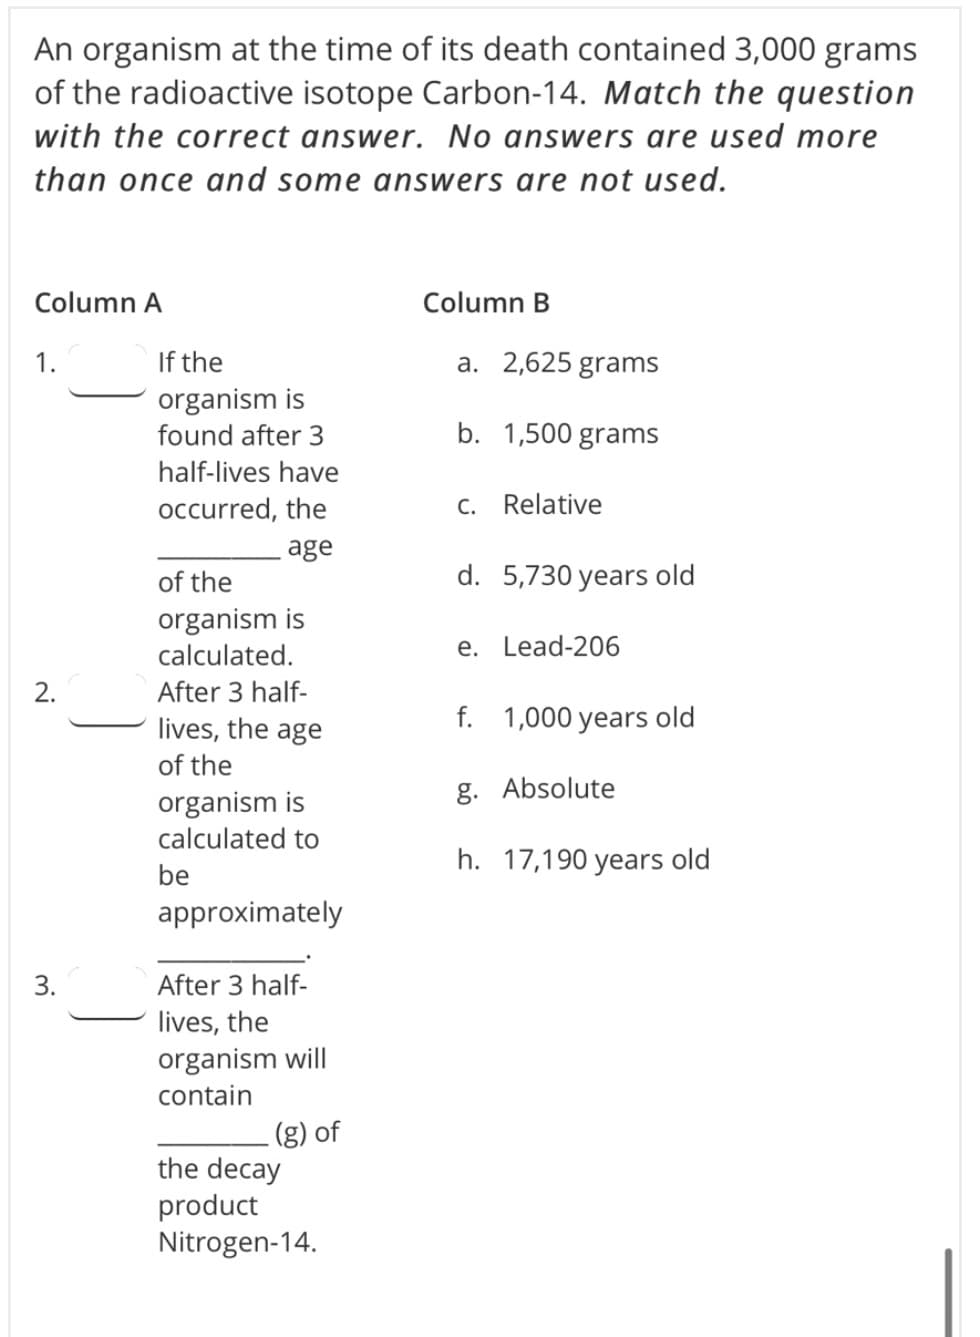 An organism at the time of its death contained 3,000 grams
of the radioactive isotope Carbon-14. Match the question
with the correct answer. No answers are used more
than once and some answers are not used.
Column A
Column B
If the
organism is
1.
a. 2,625 grams
found after 3
b. 1,500 grams
half-lives have
occurred, the
C. Relative
age
of the
d. 5,730 years old
organism is
calculated.
e. Lead-206
After 3 half-
lives, the age
f. 1,000 years old
of the
g. Absolute
organism is
calculated to
h. 17,190 years old
be
approximately
3.
After 3 half-
lives, the
organism will
contain
(g) of
the decay
product
Nitrogen-14.
2.
